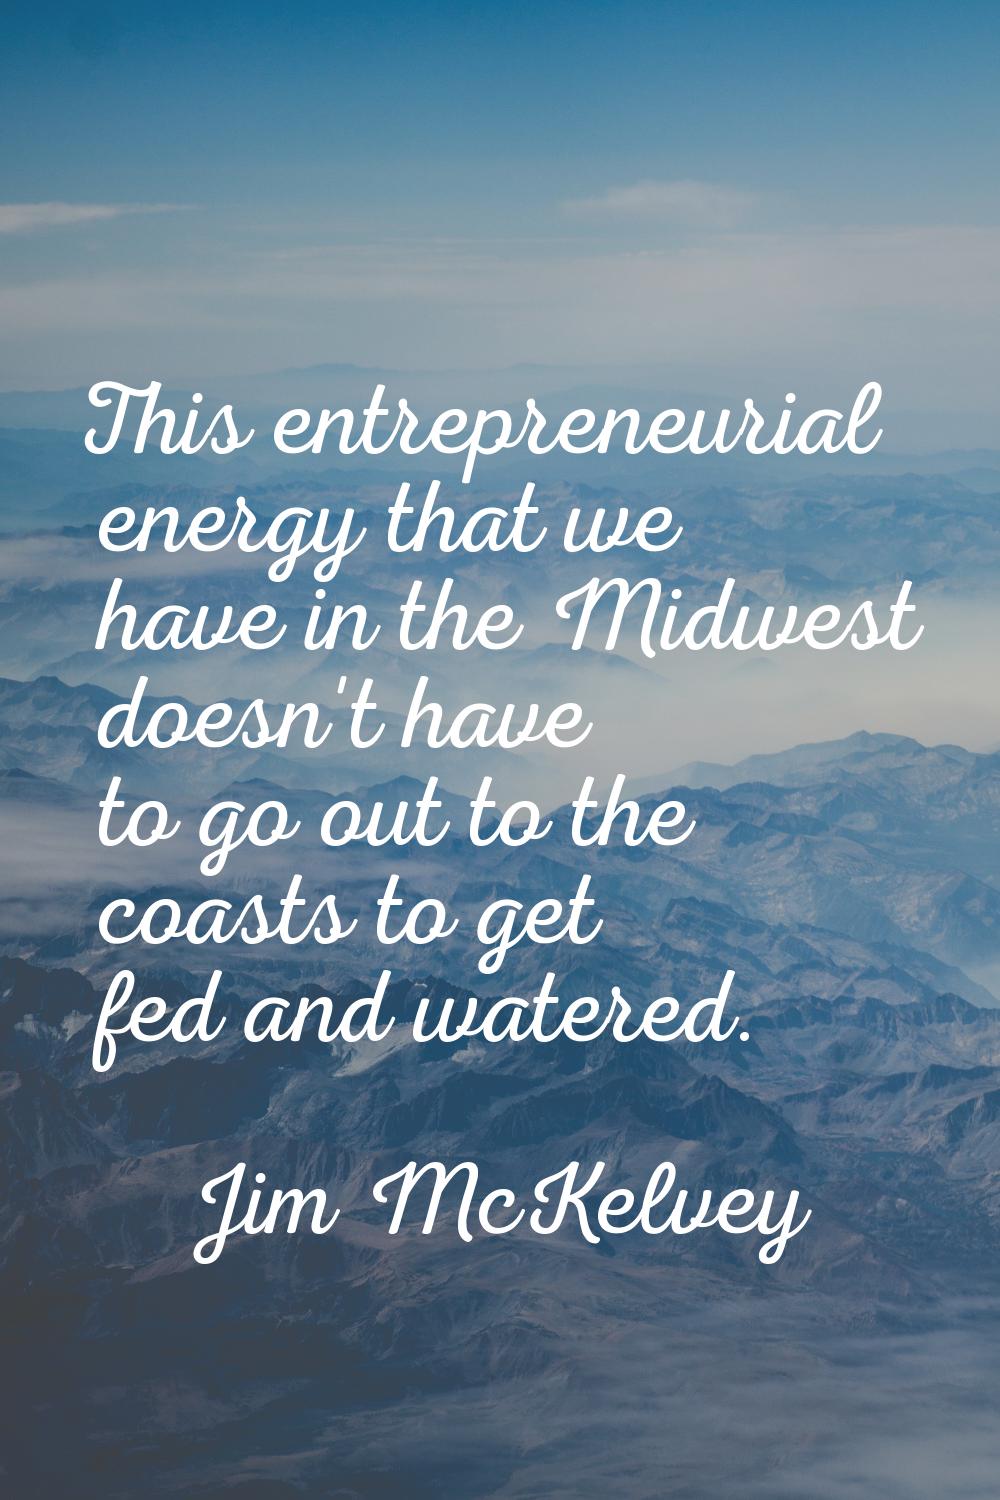 This entrepreneurial energy that we have in the Midwest doesn't have to go out to the coasts to get